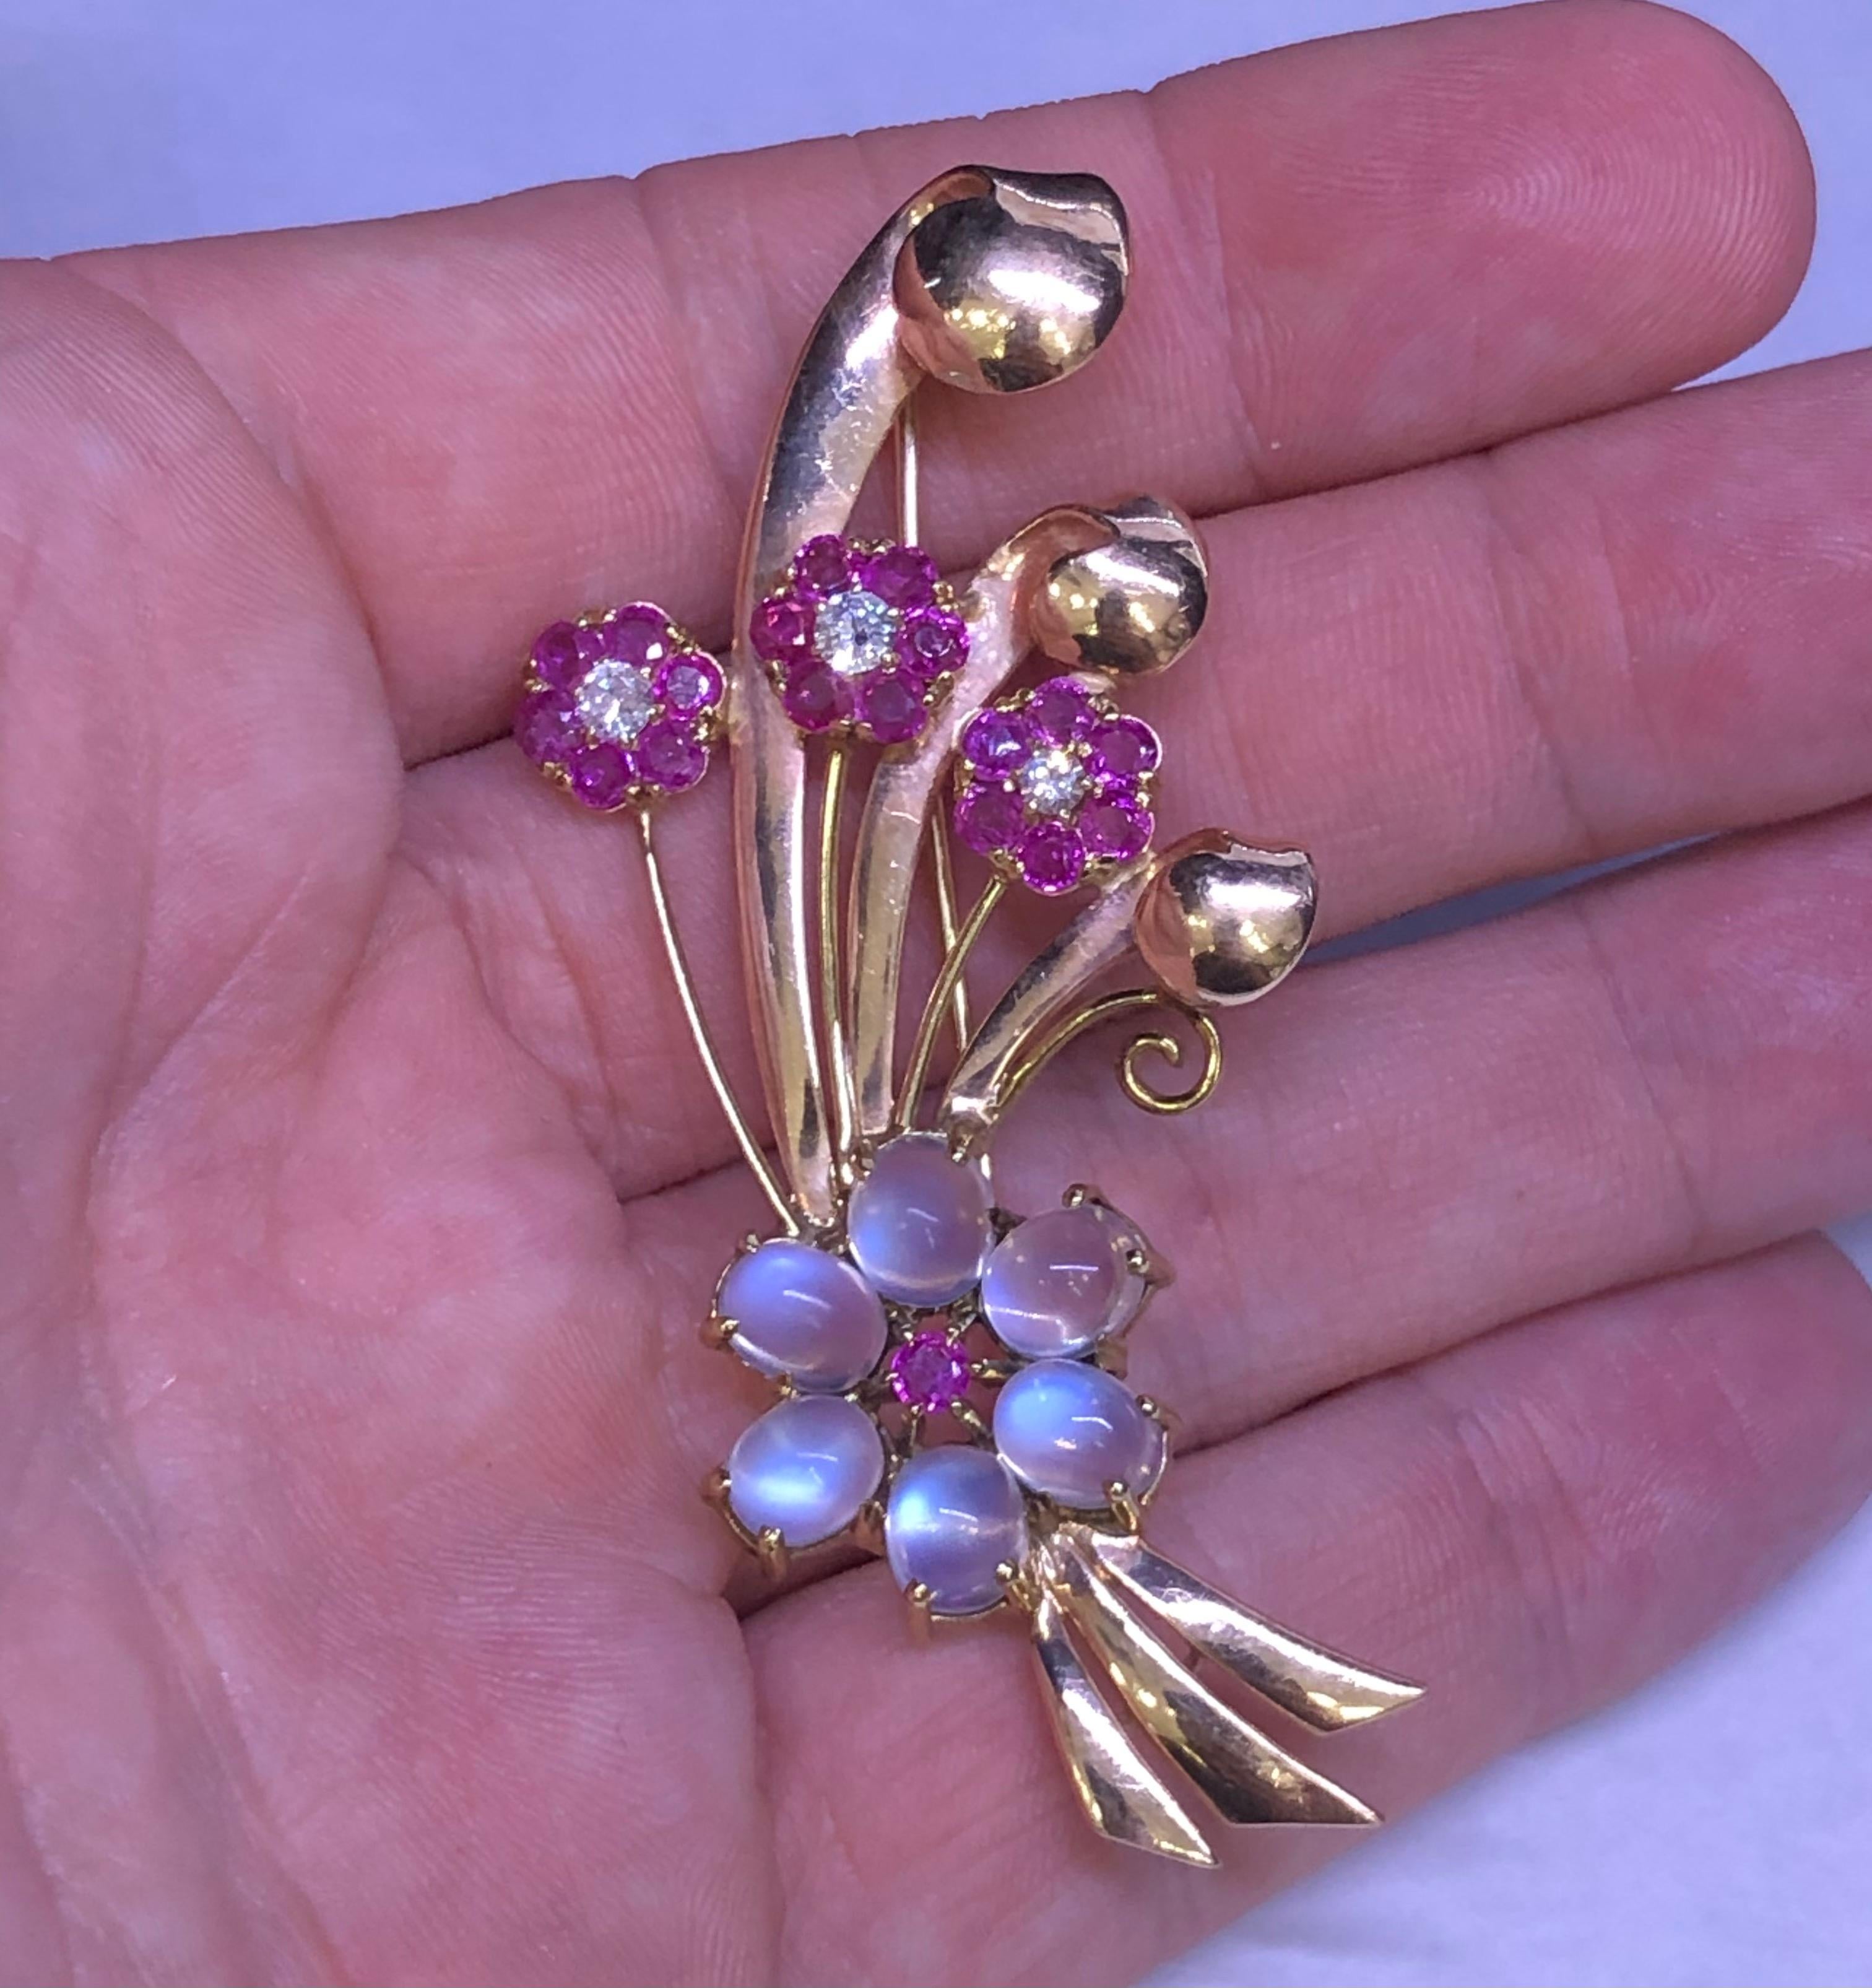 Beautifully crafted floral spray brooch crafted in 14k yellow gold. This fantastic design is set with gemstones throughout.  The brooch is set natural rubies that display a vivid red color that almost pop off the design, accenting the ruby gemstones